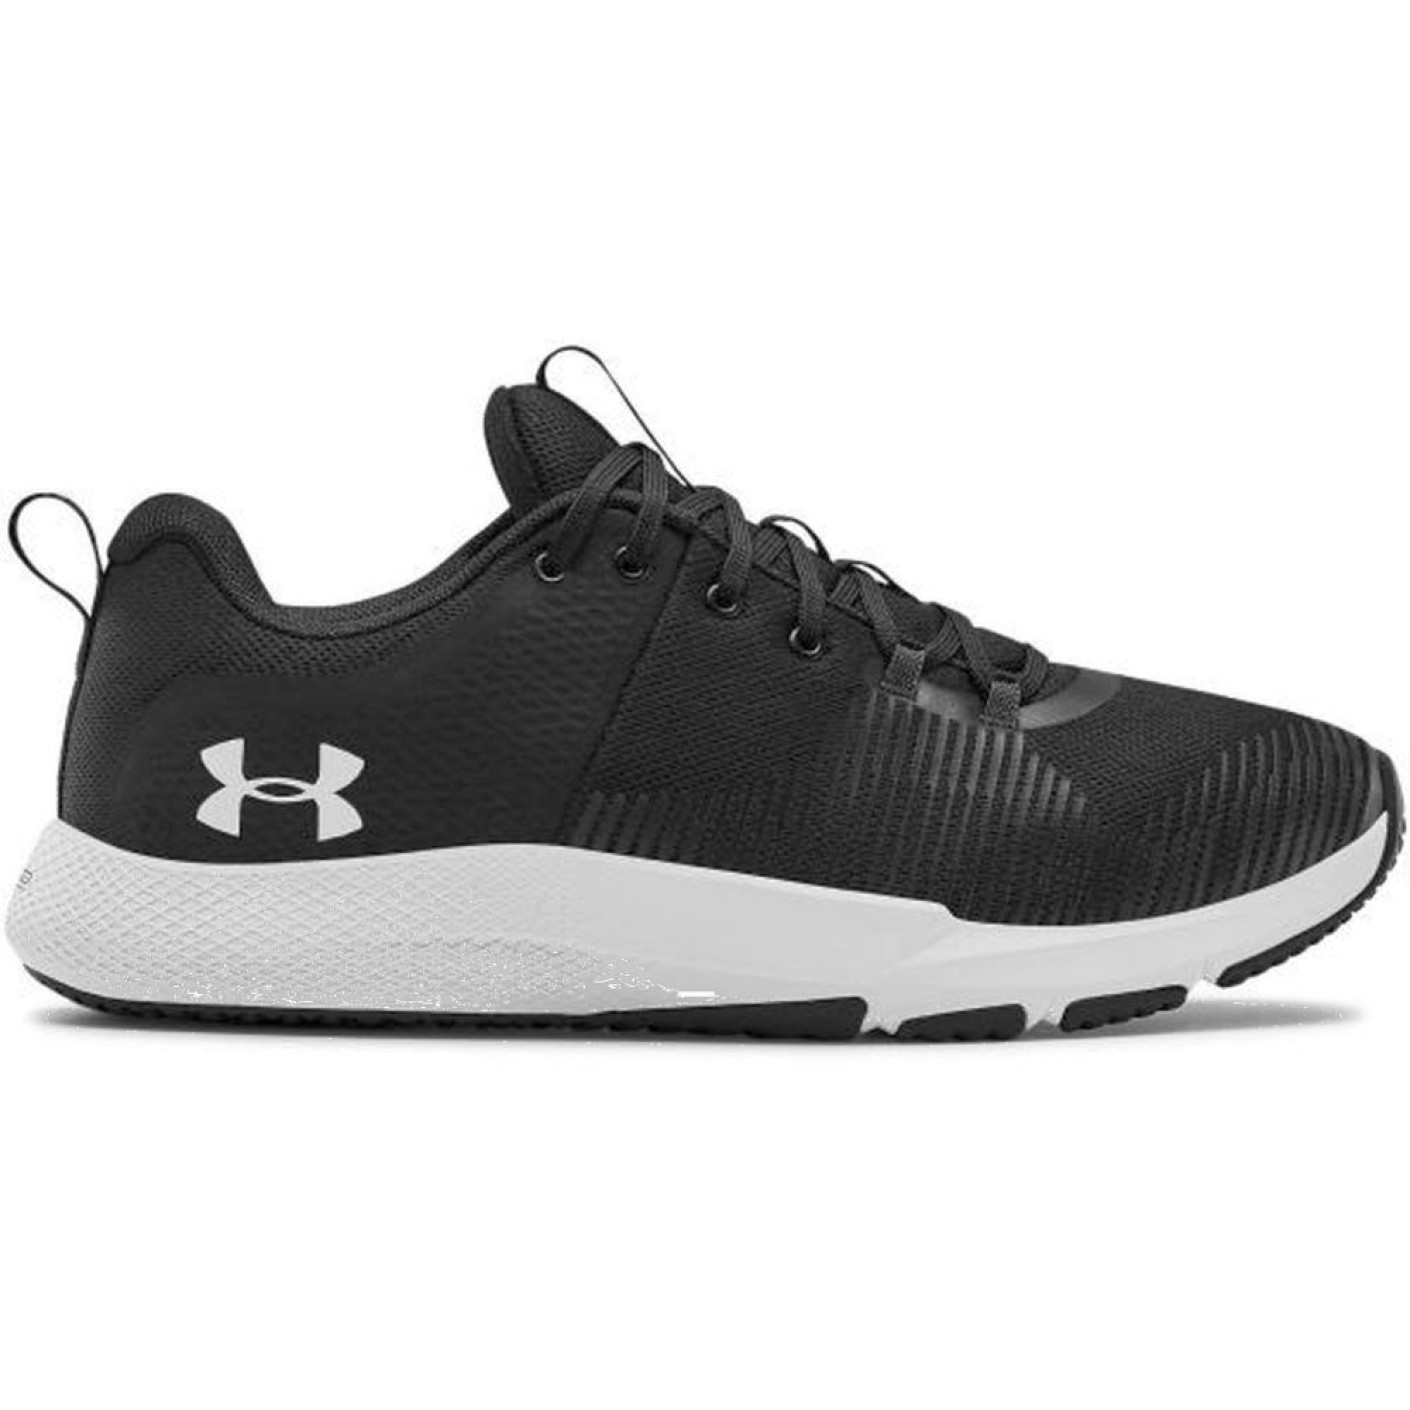 Under Armour Charged Engage Hardloopschoenen Zwart Wit